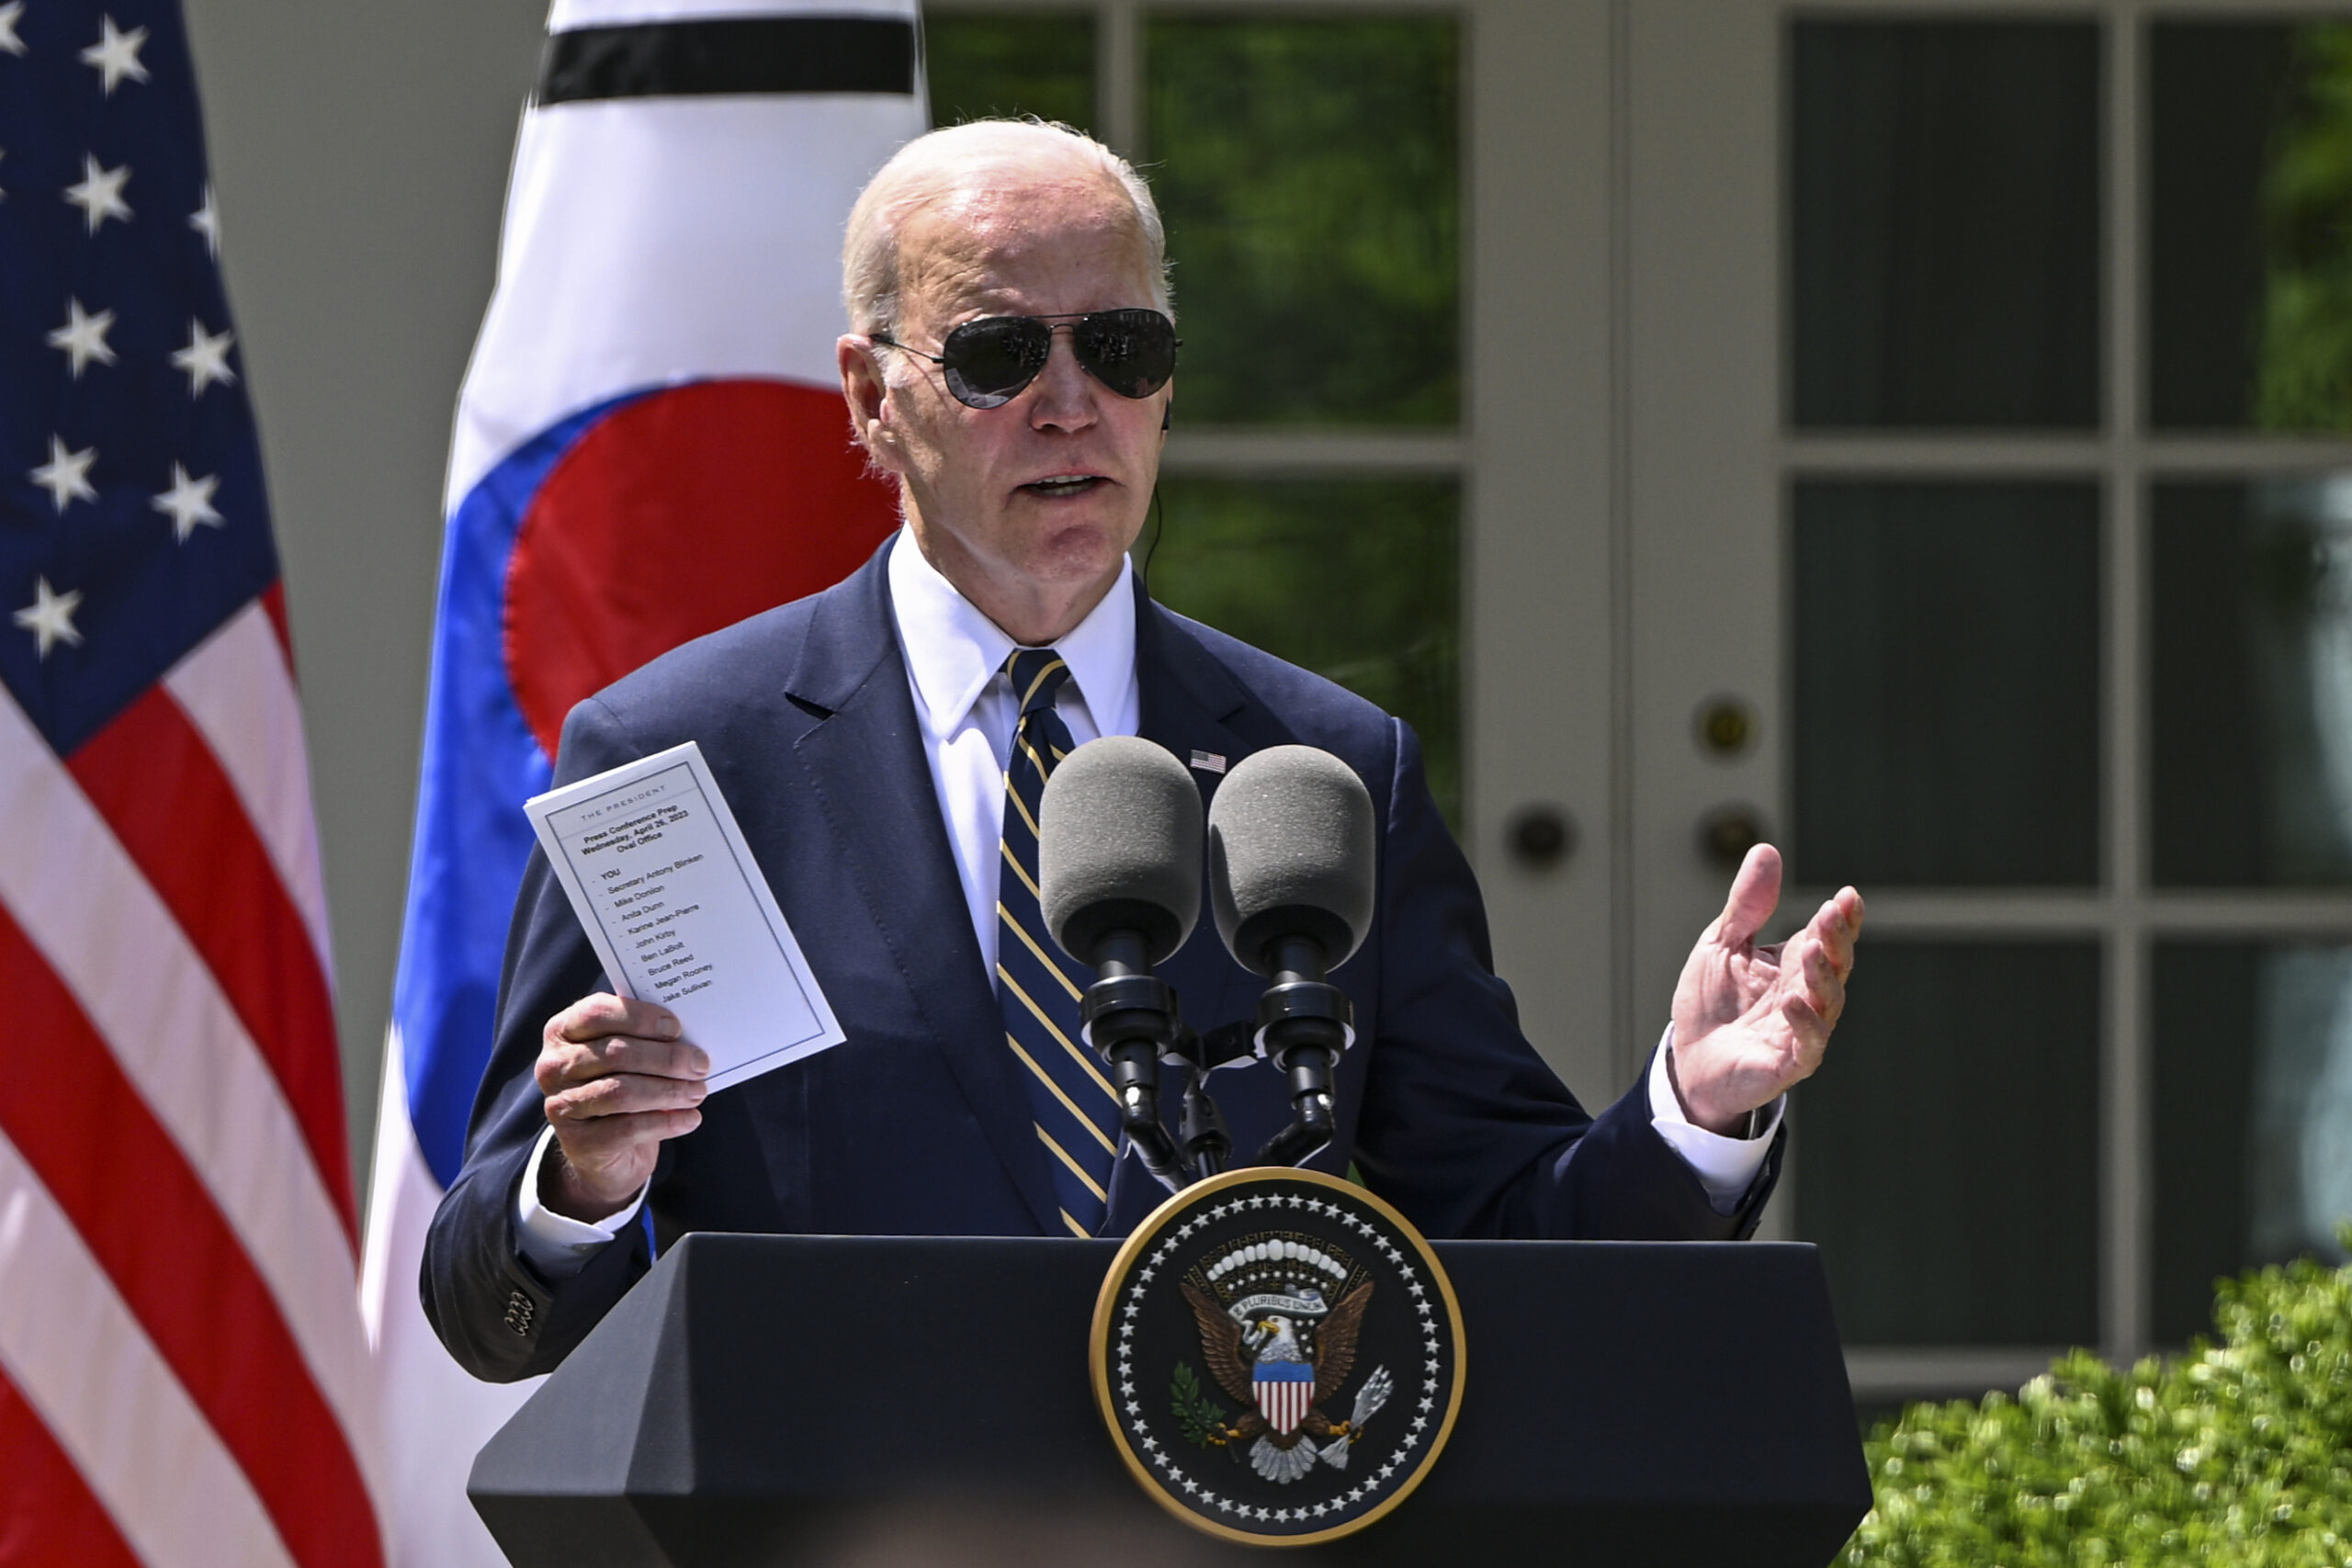 Biden Faces A Sea Of Troubles As He Stumbles With Re-Election Bid